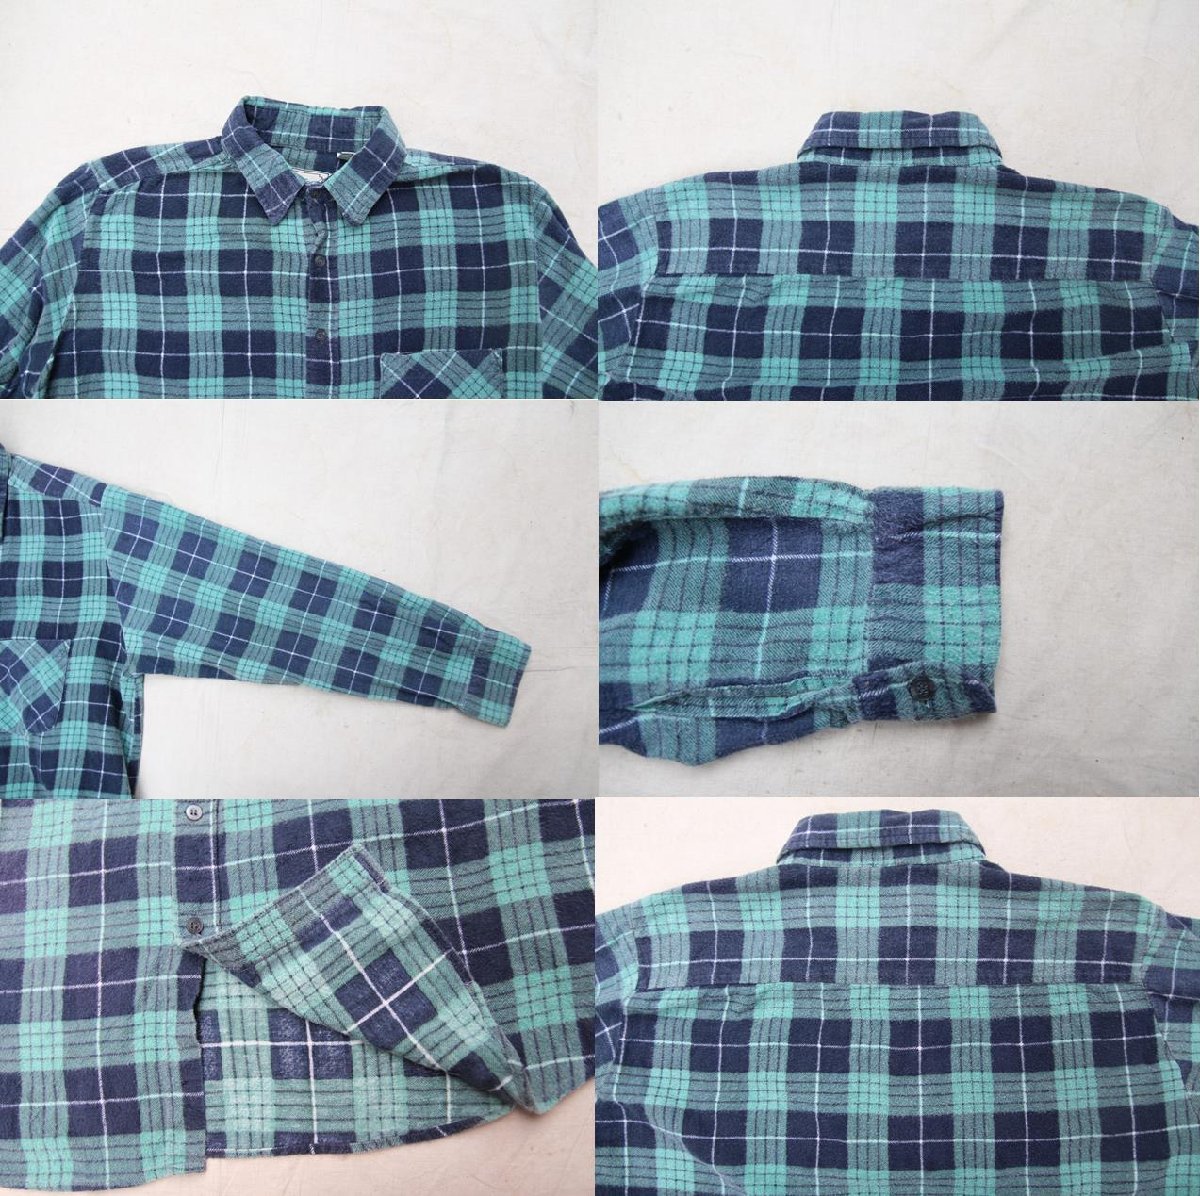 80s 90s VINTAGE ヴィンテージ USED 古着 Open Trails L/S Flannel Shirts Check 長袖フランネルシャツ チェック柄 Cotton L Green Navy_画像4